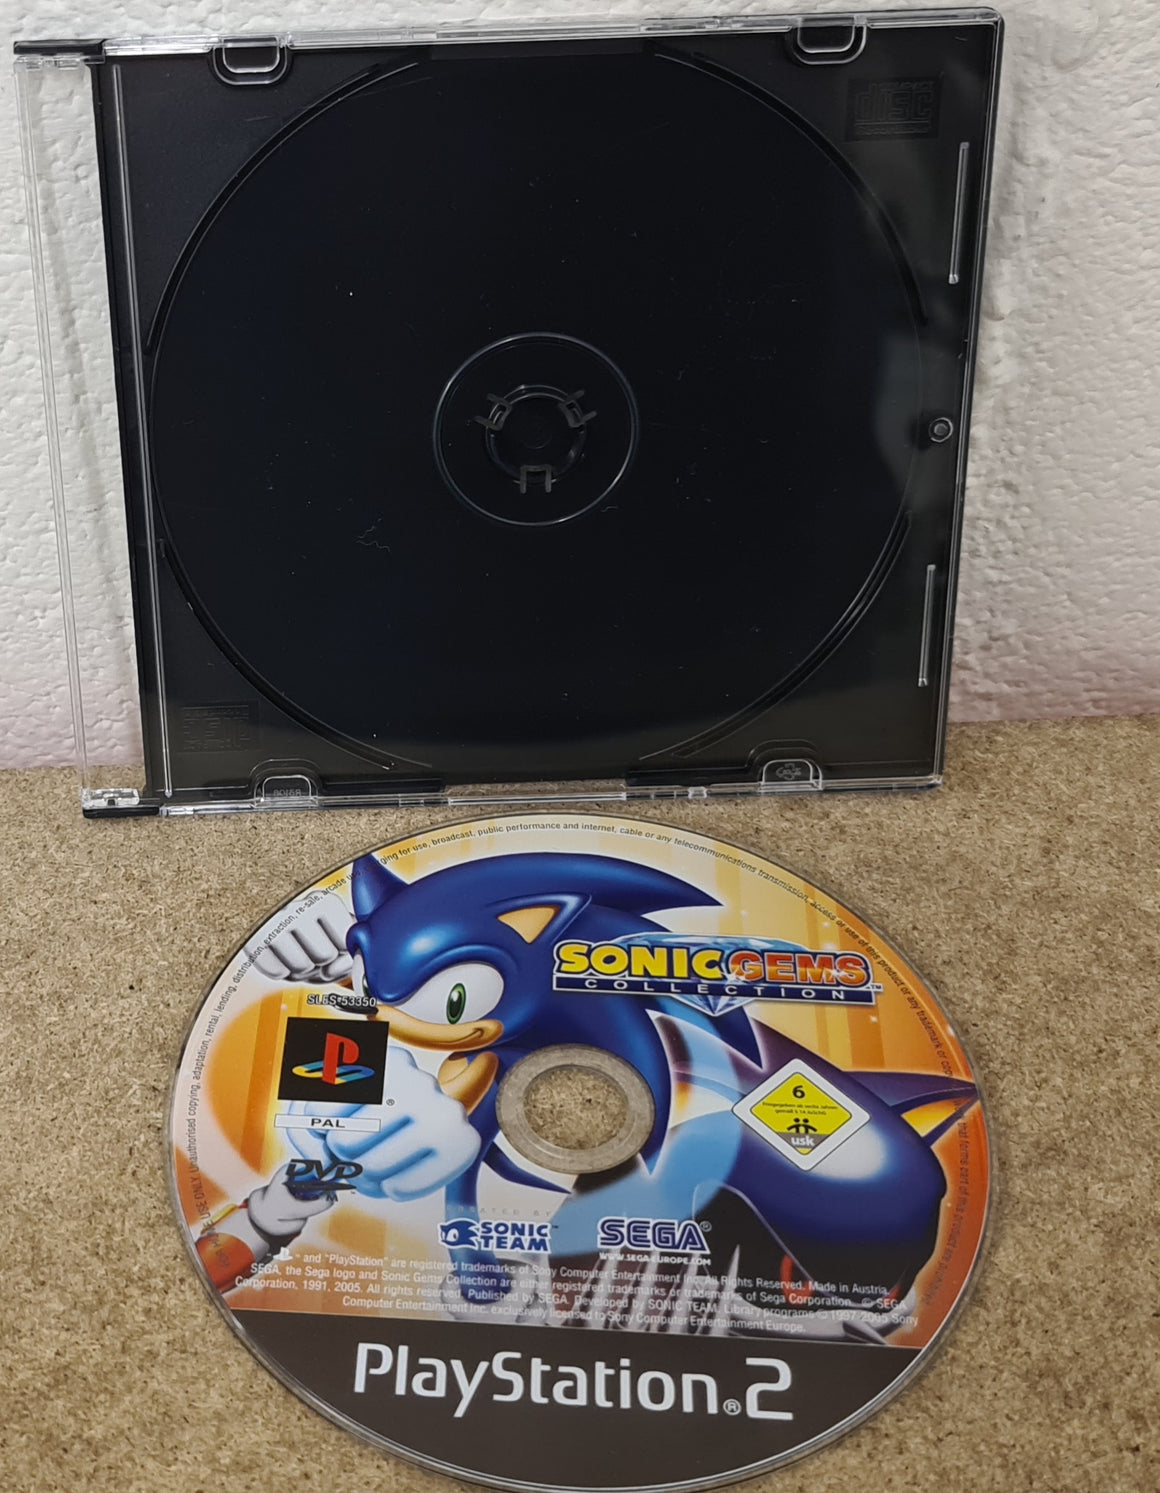 Sonic Gems Collection Sony Playstation 2 (PS2) Game Disc Only – Retro ...